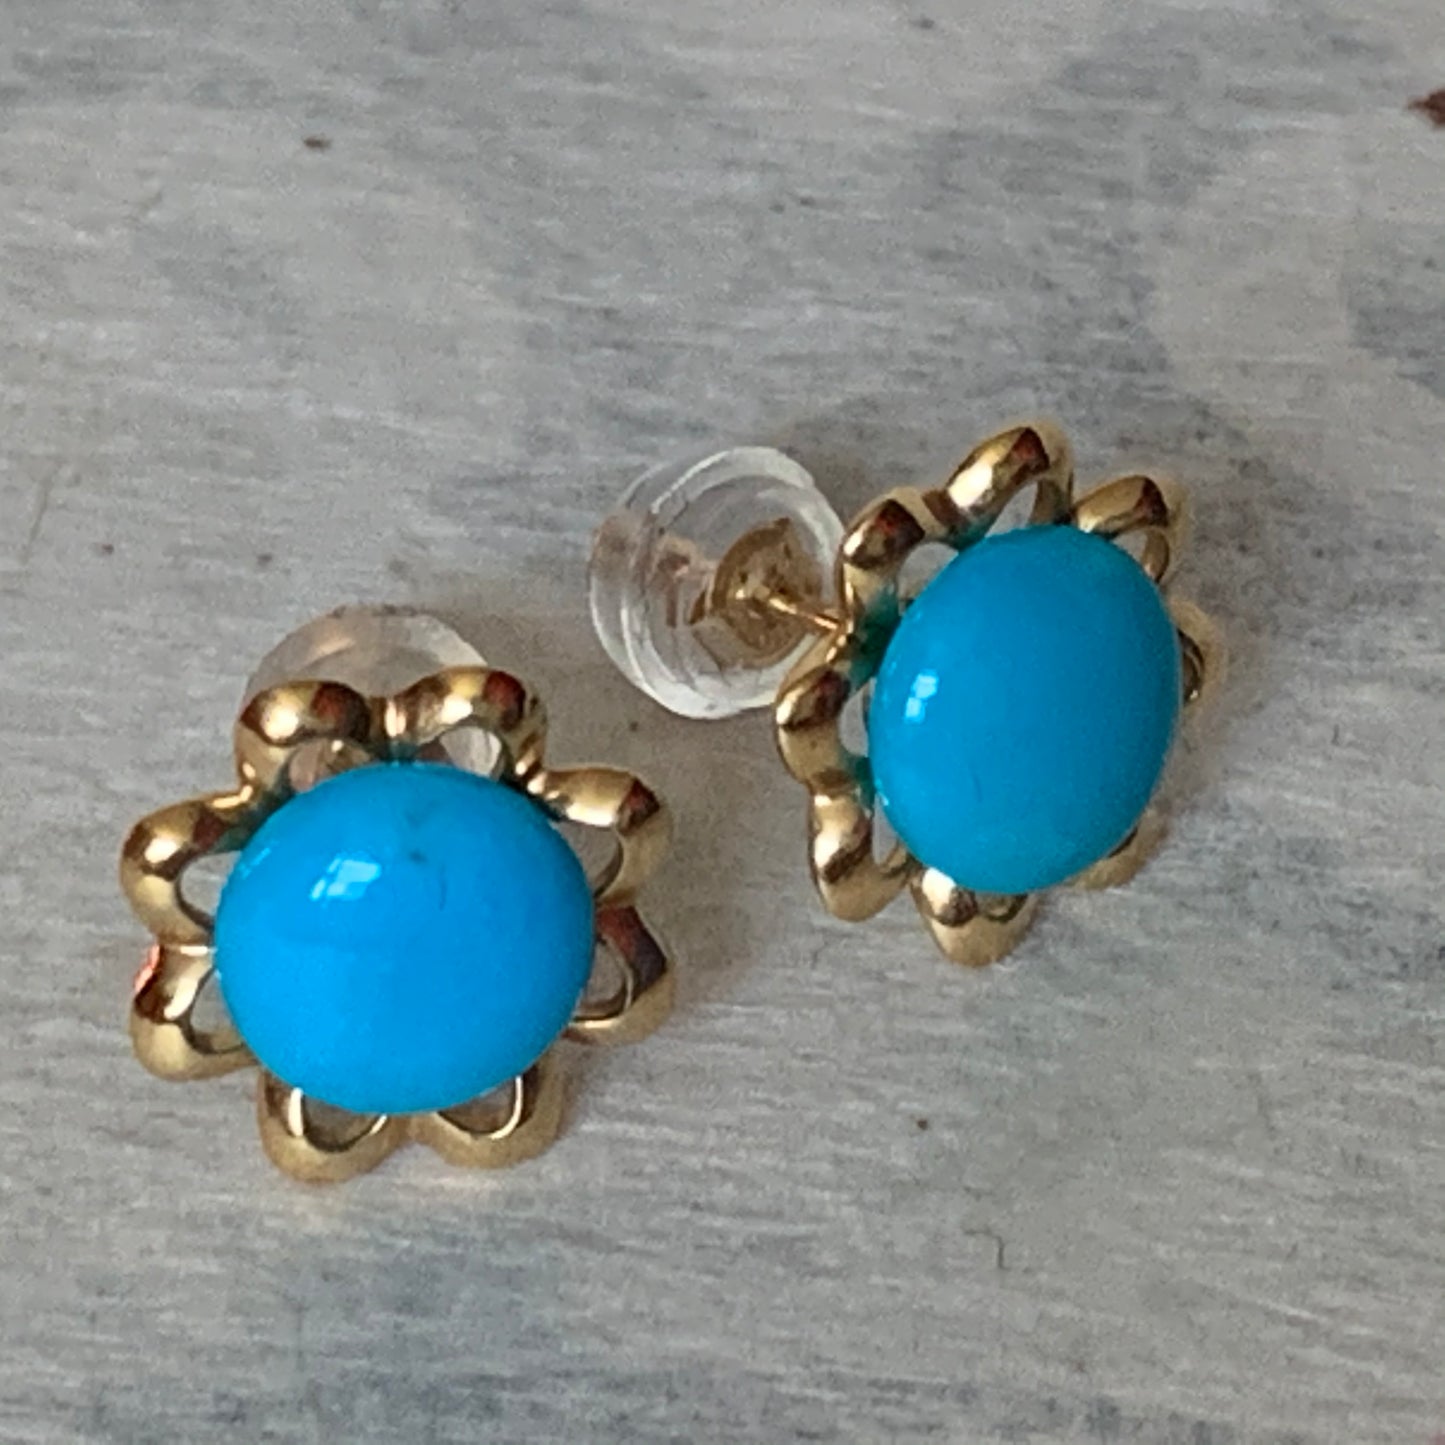 A pair of turquoise earrings in 14kt setting